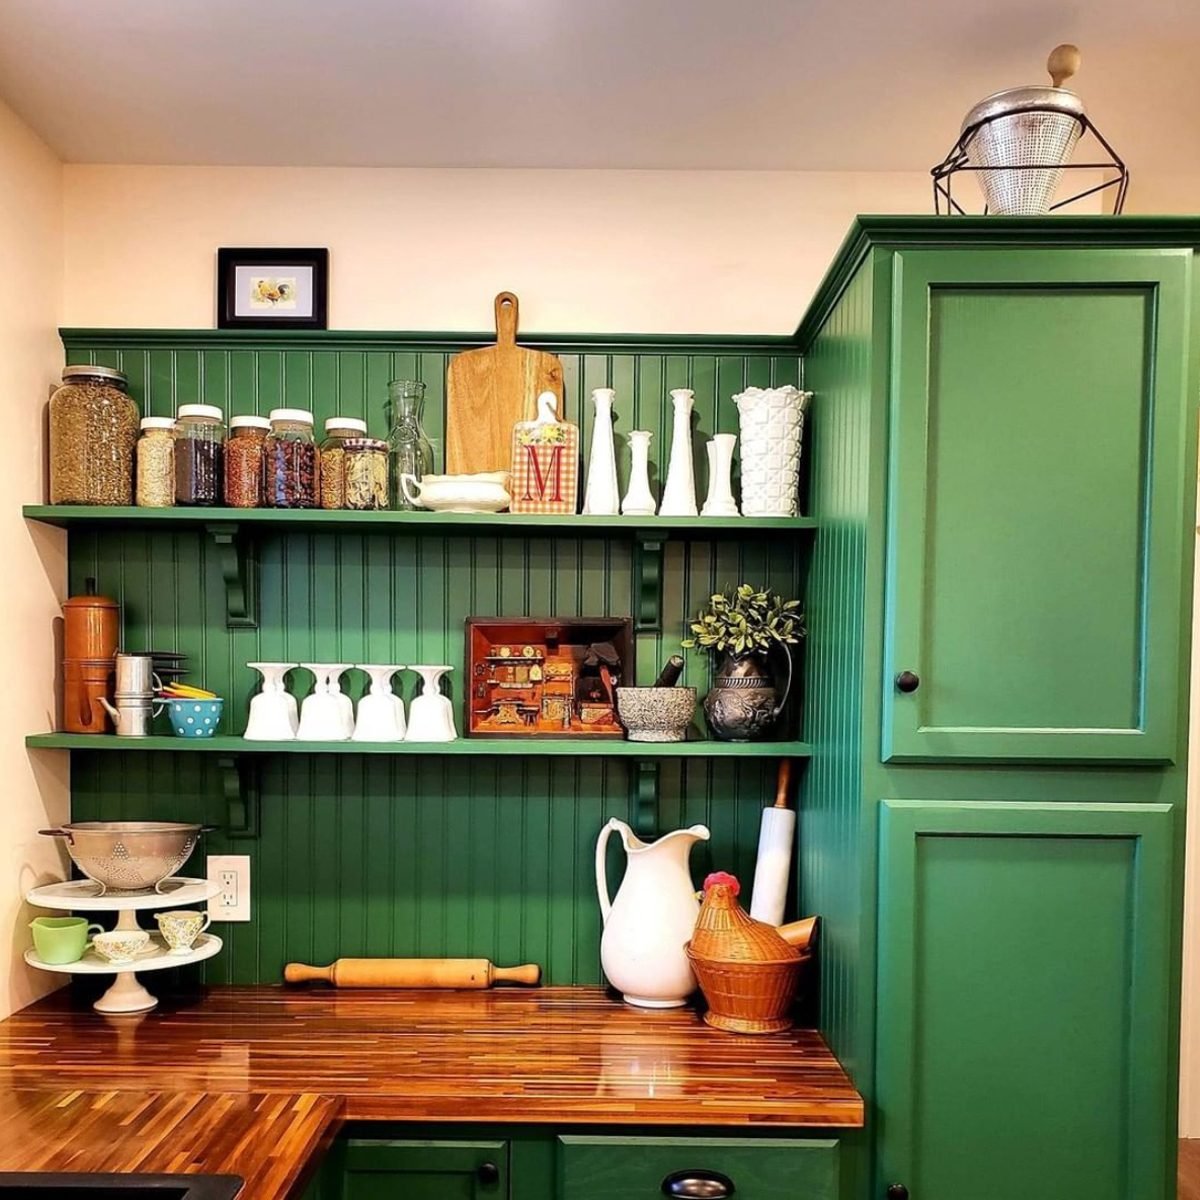 Heirloom Traditions Paint Color Inspiration- Greens